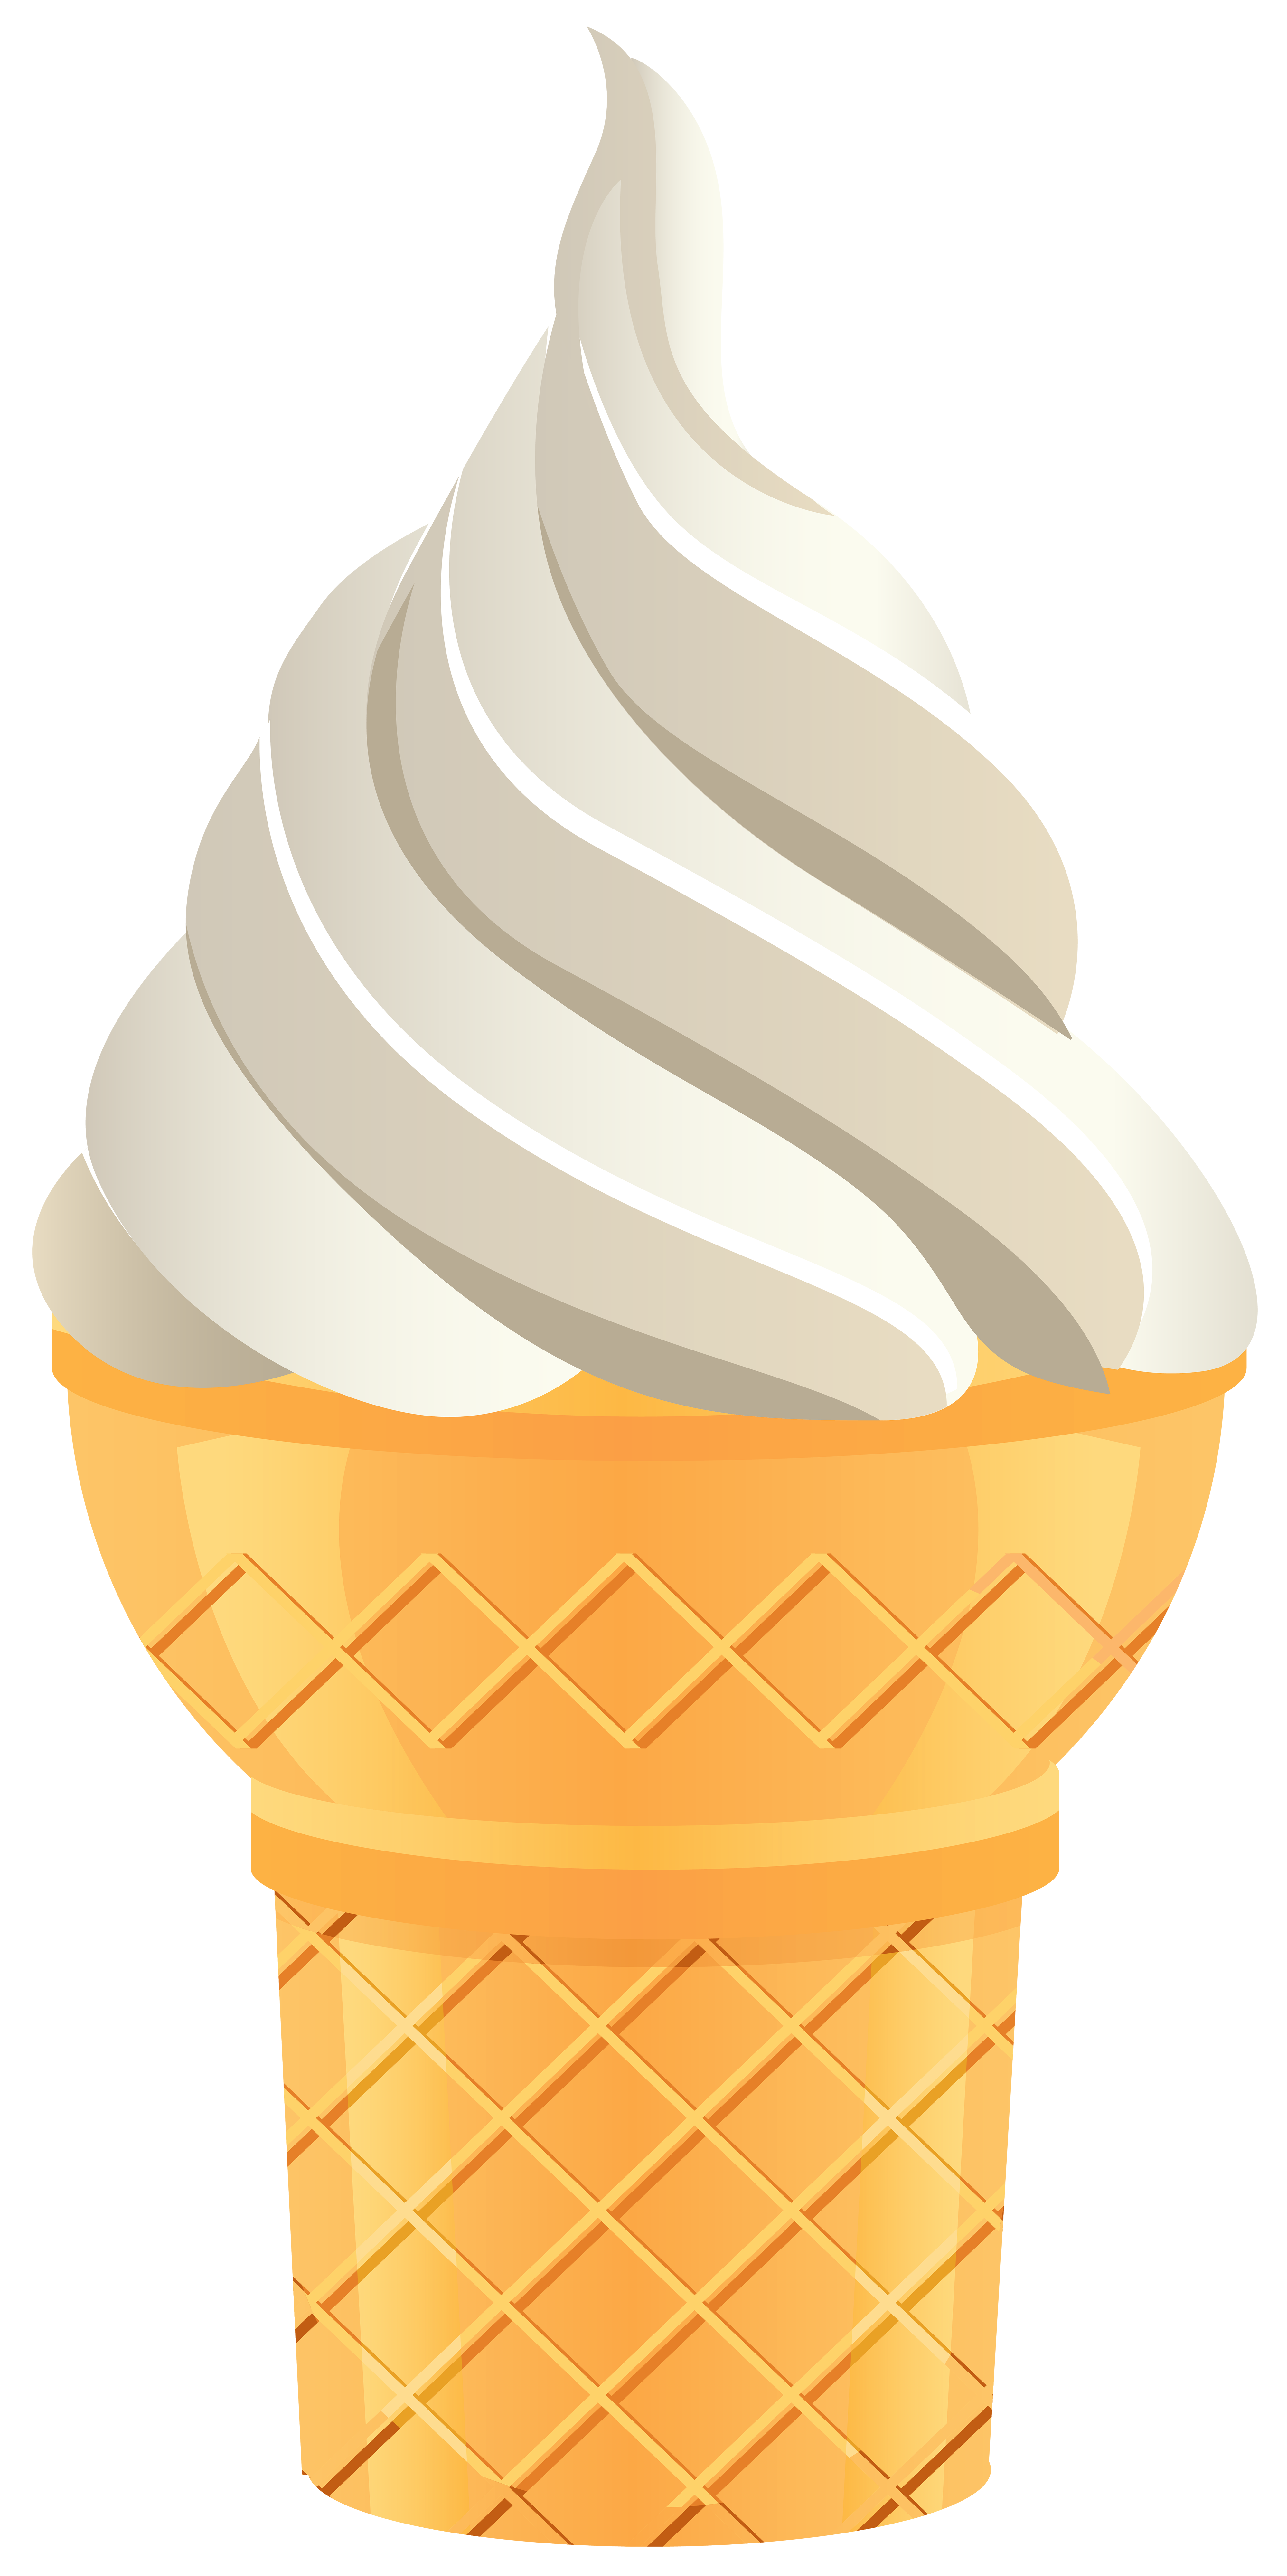 Vanilla Ice Cream Cone PNG Transparent Clip Art Image​ | Gallery  Yopriceville - High-Quality Free Images and Transparent PNG Clipart